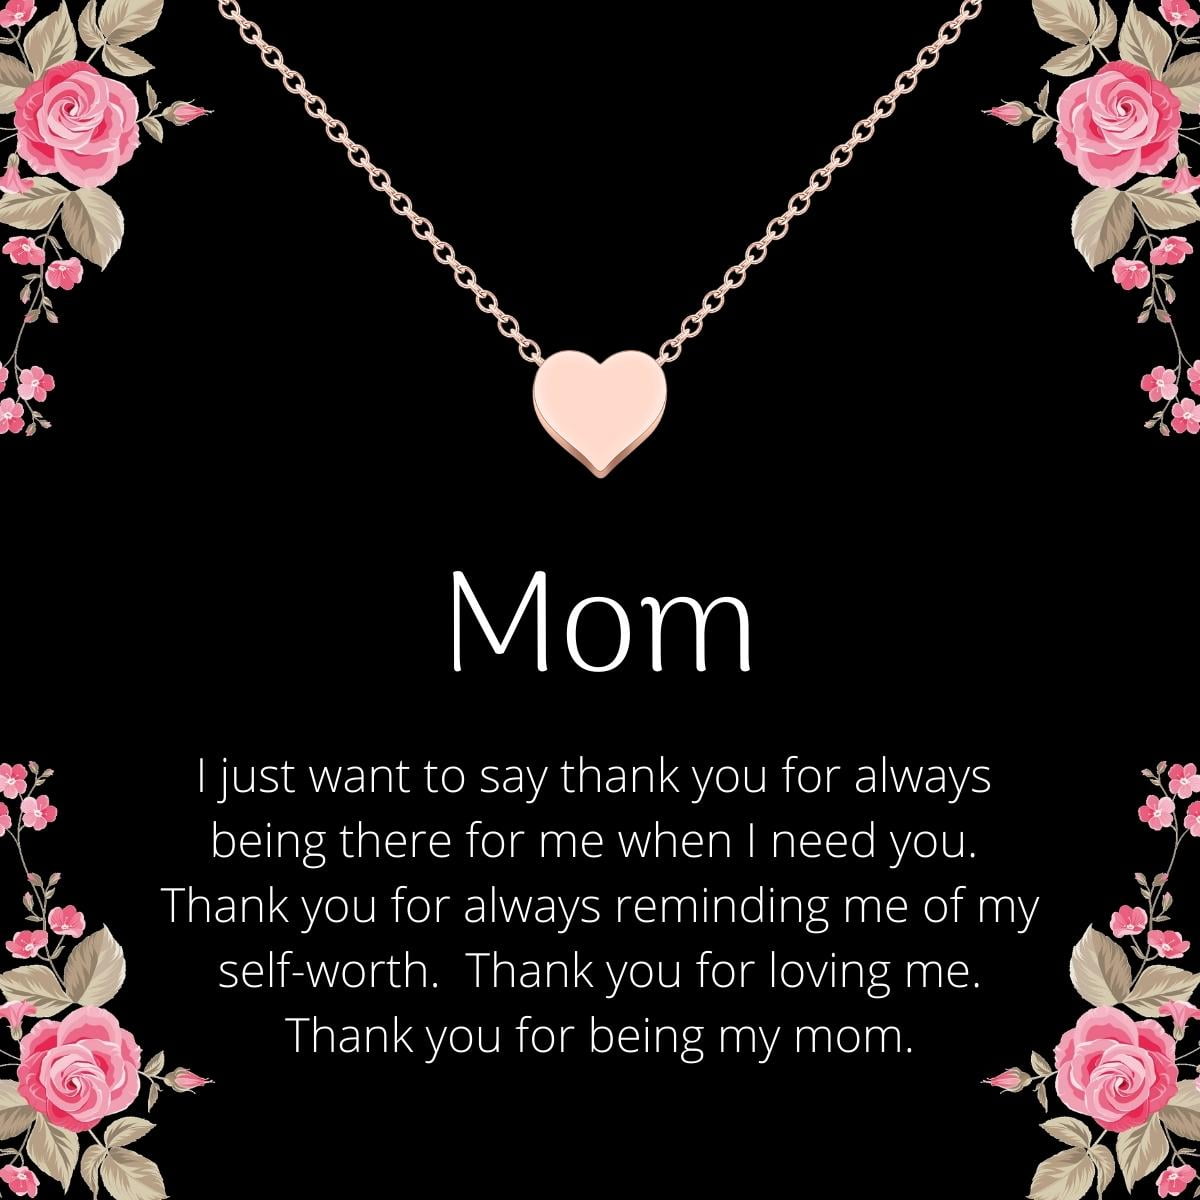 Express Your Love Gifts You Supported Me Meaningful Mom Gift Scripted Necklace Stainless Steel Mothers Day 